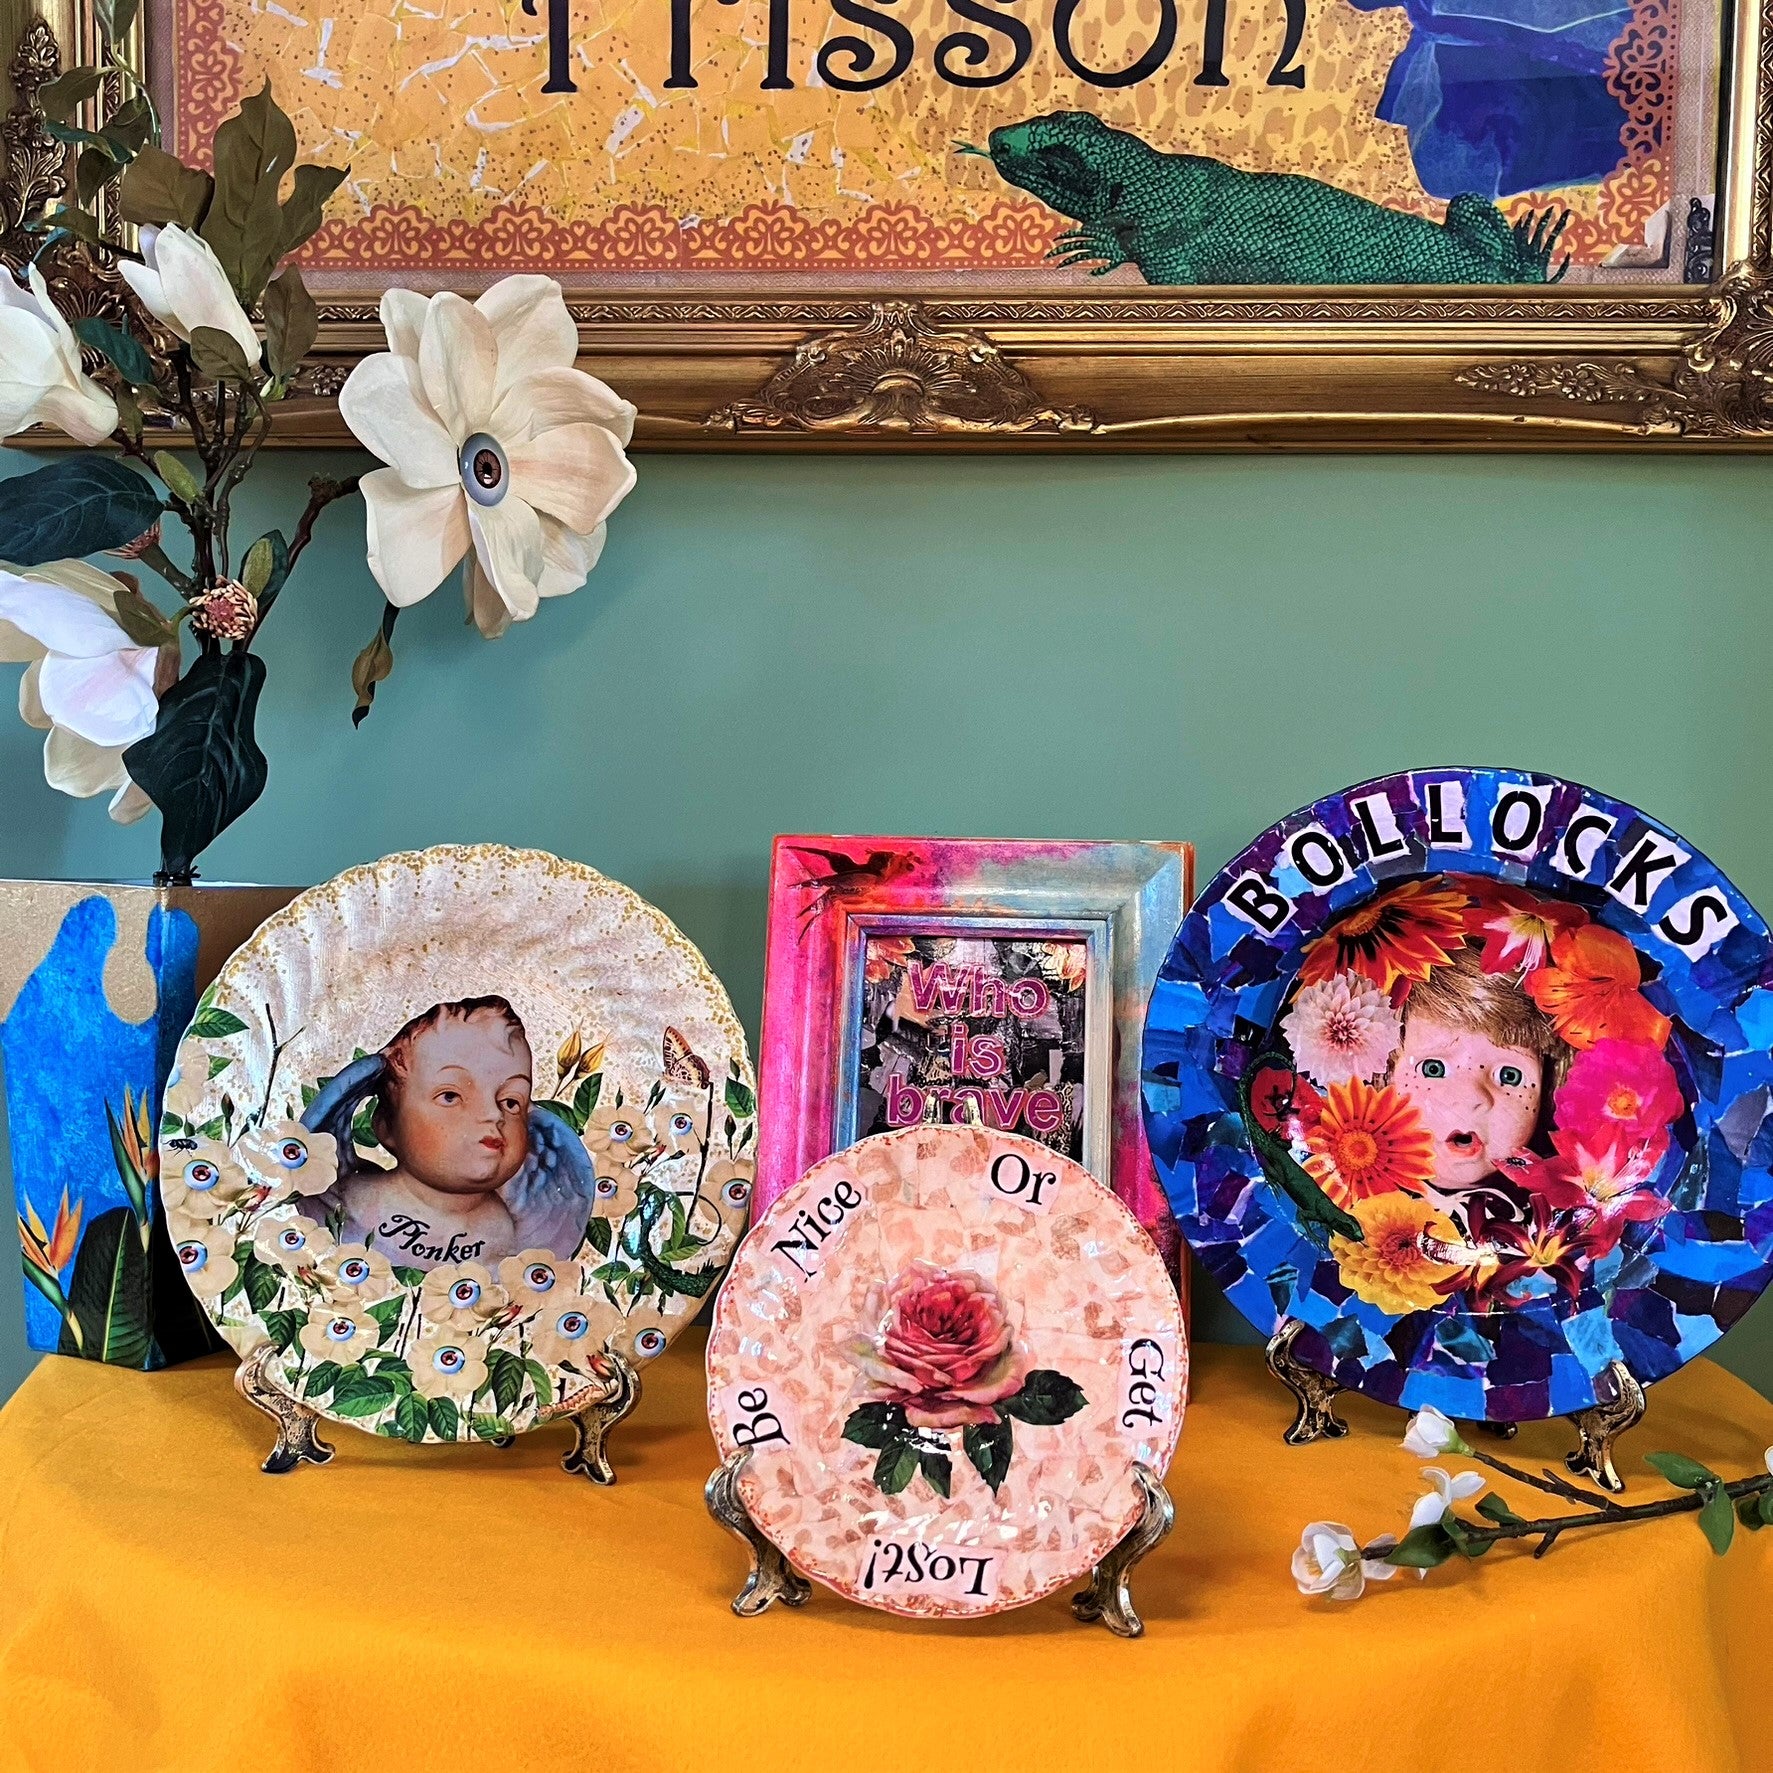 "Bollocks" Wall Plate by House of Frisson, featuring a collage of a vintage male doll surrounded by flowers and a lizard, on a blue background. Plate on plate stand, resting on a table with other plates.